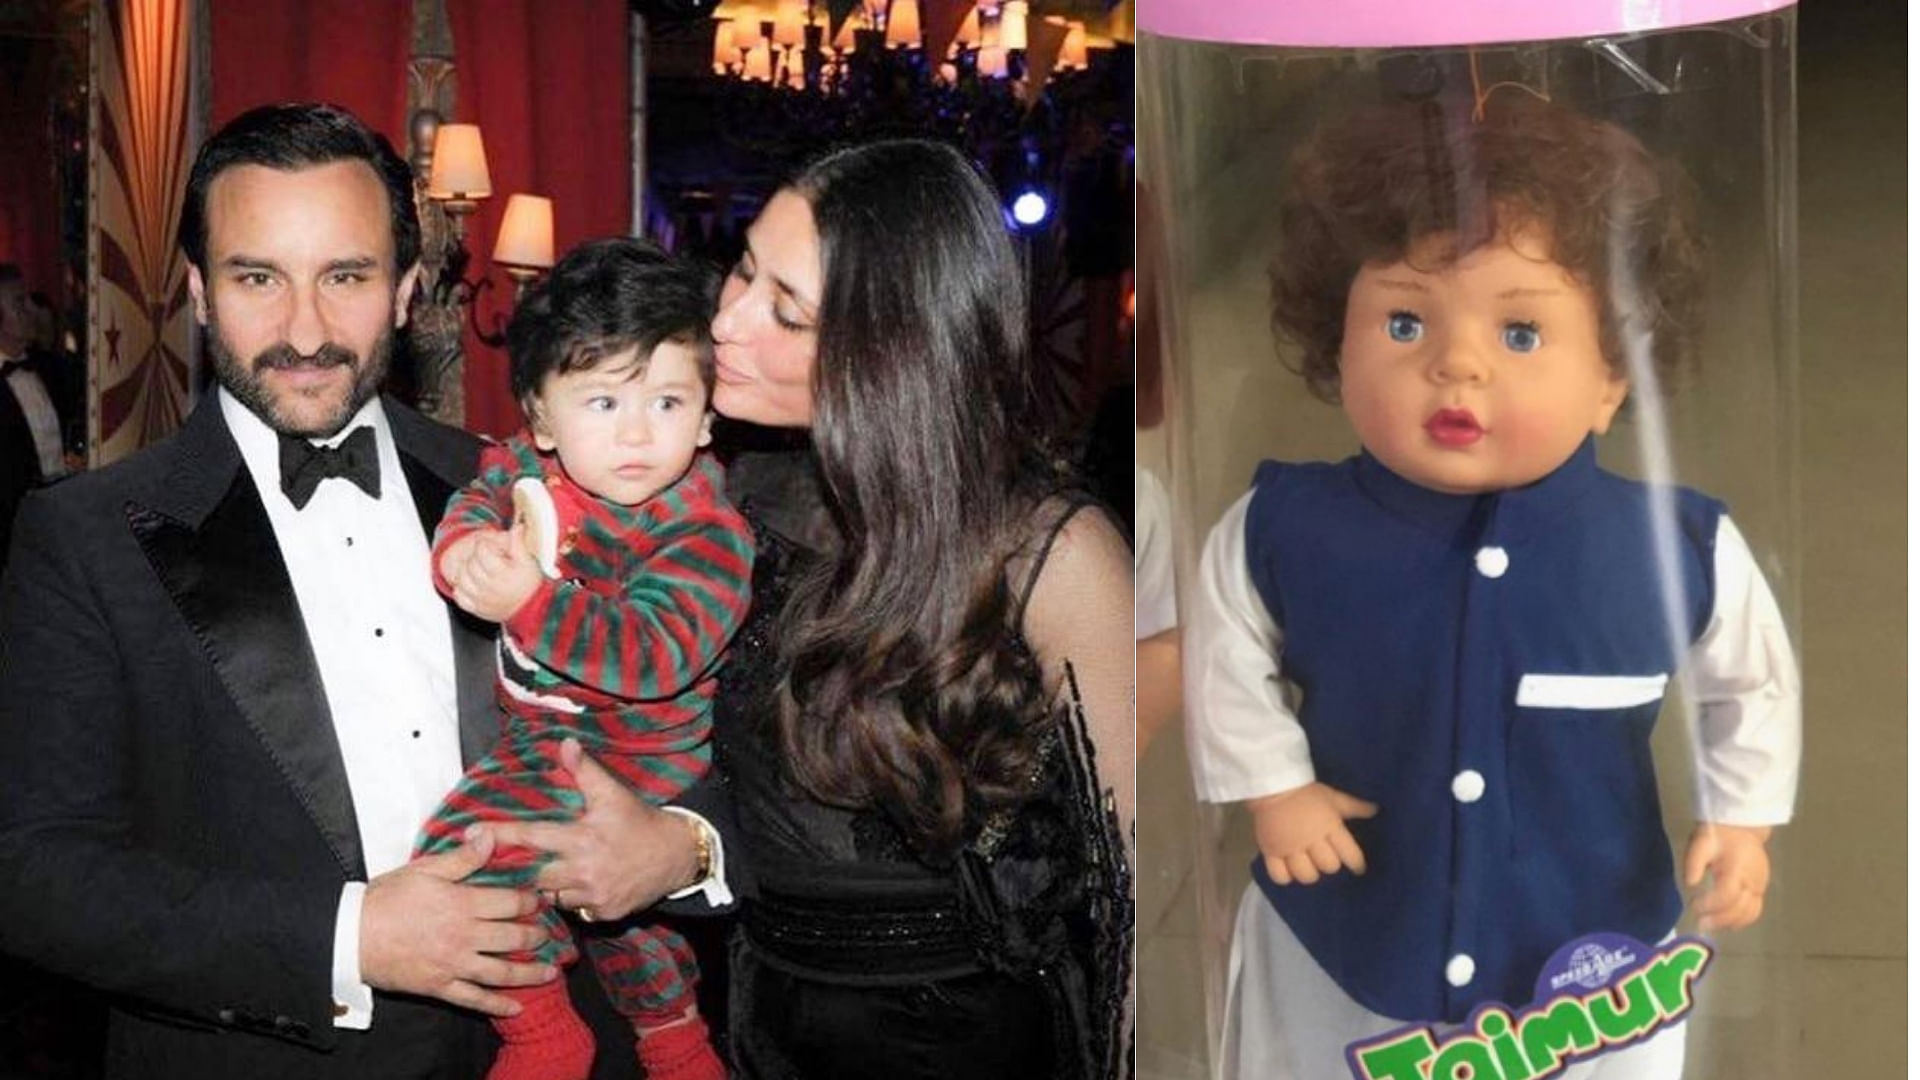 If you’ve seen the picture of the doll modelled on Taimur doing the rounds on WhatsApp and social media, you know you’ve seen it all.